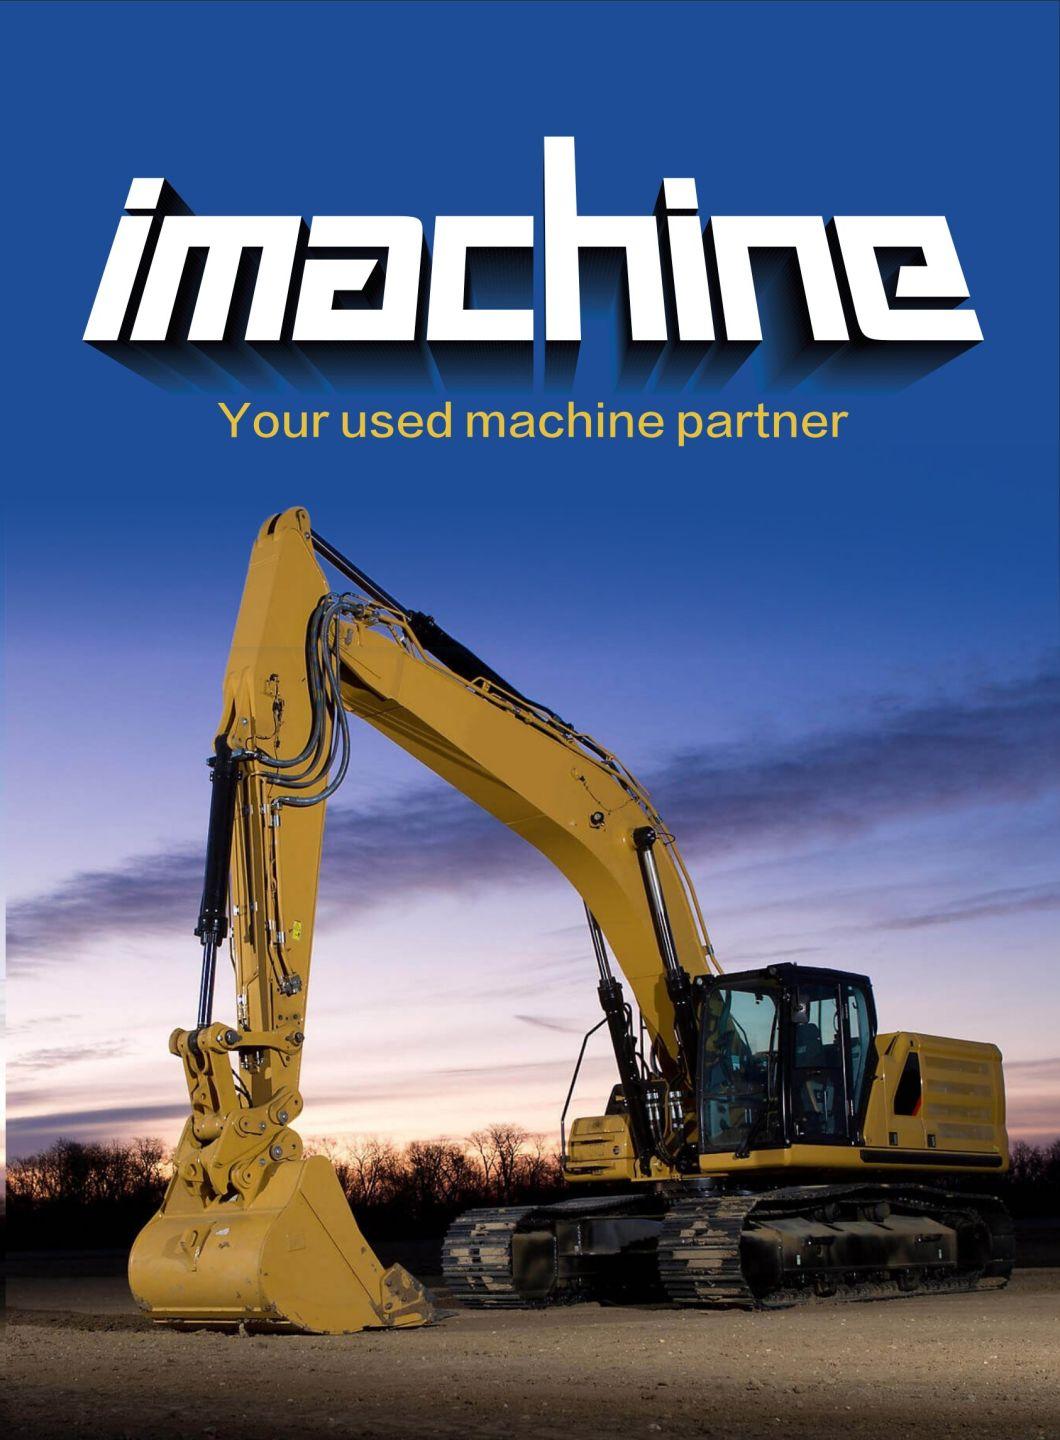 Imachine Used Doosan Dh55 Mini Excavator in Stock for Sale Great Condition